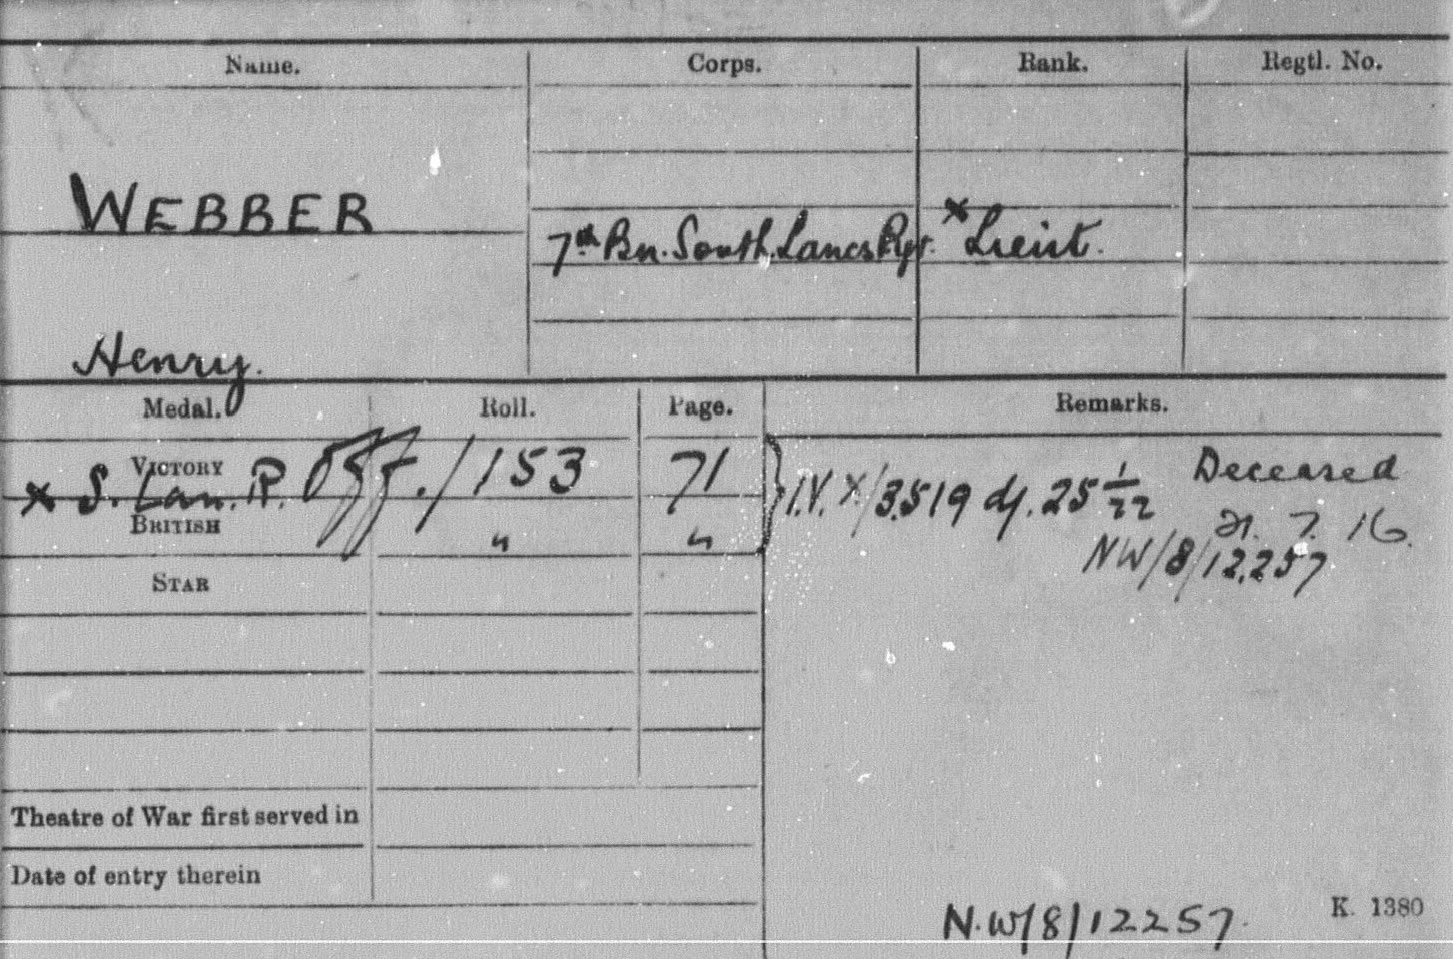 WWI Campaign Medal Record Card on TheGenealogist